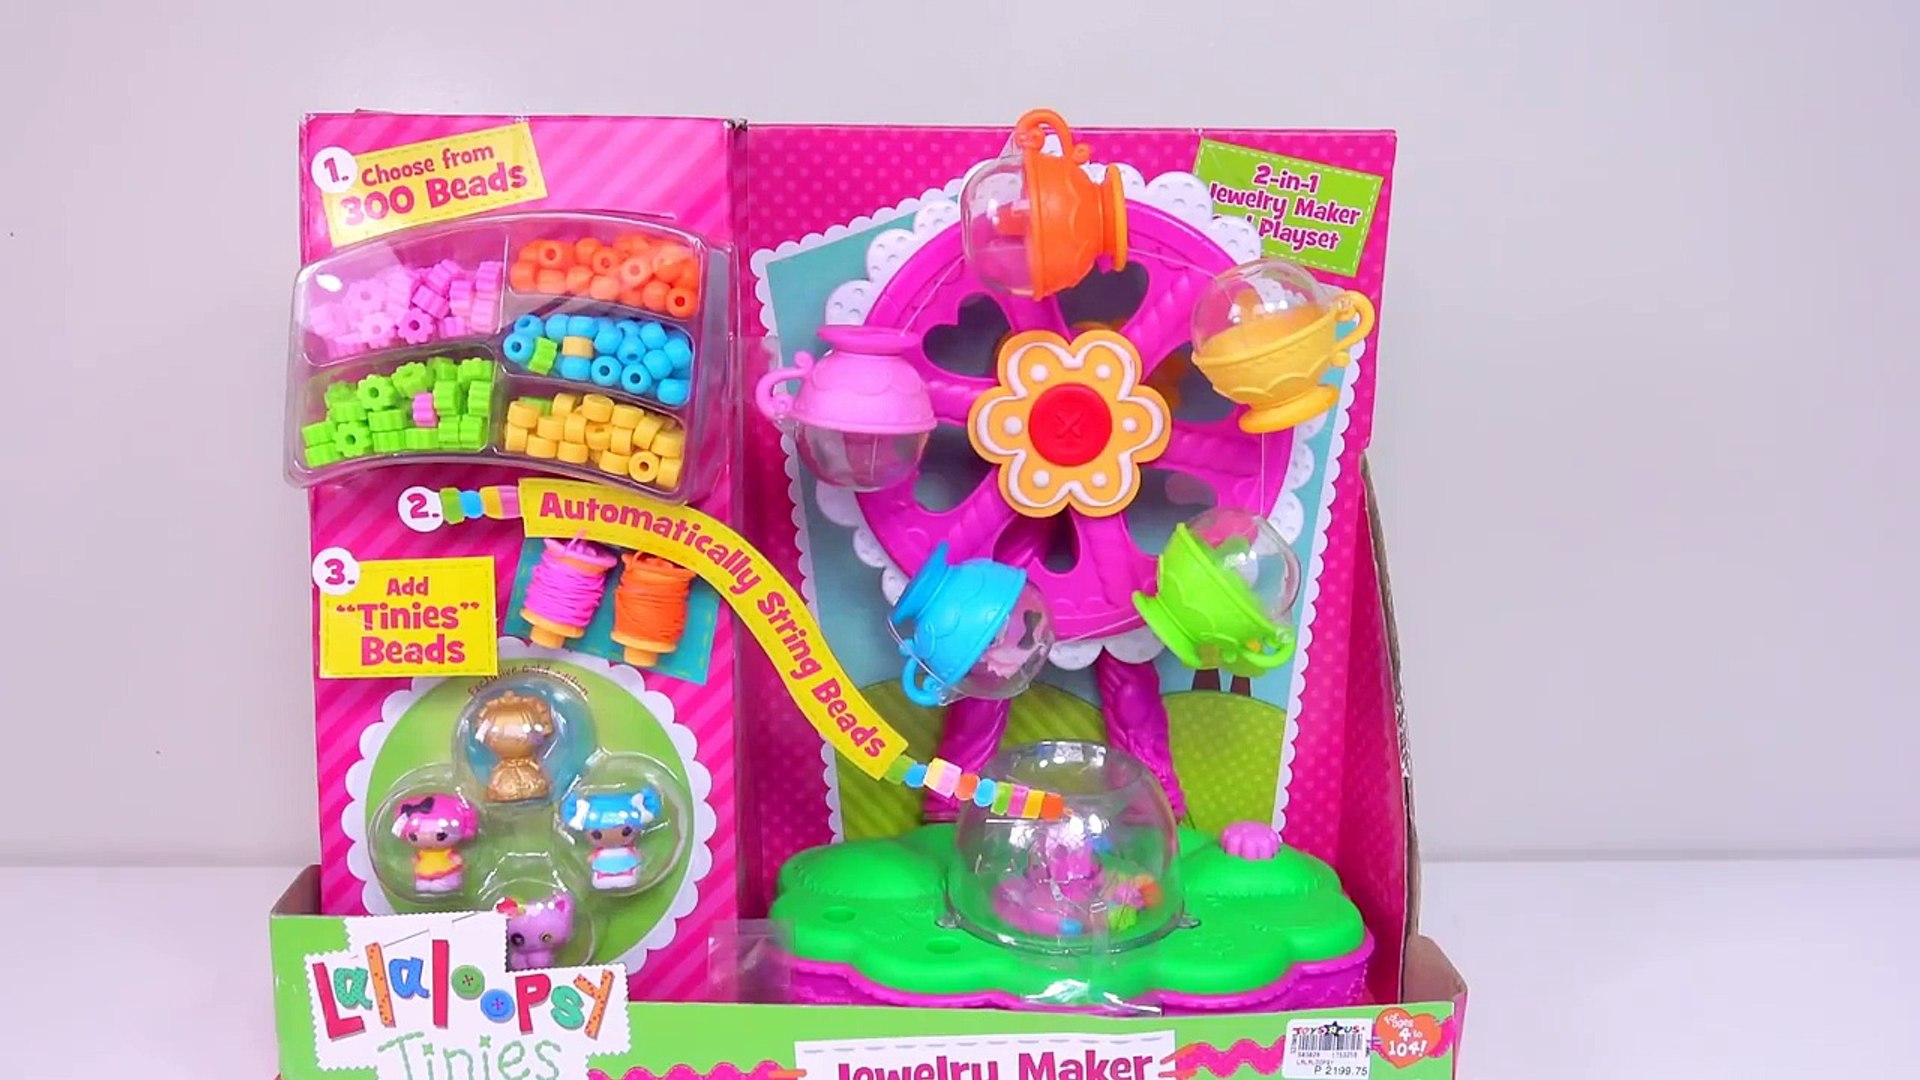 Lalaloopsy Tinies Jewelry Maker Playset 300 Beads for sale online